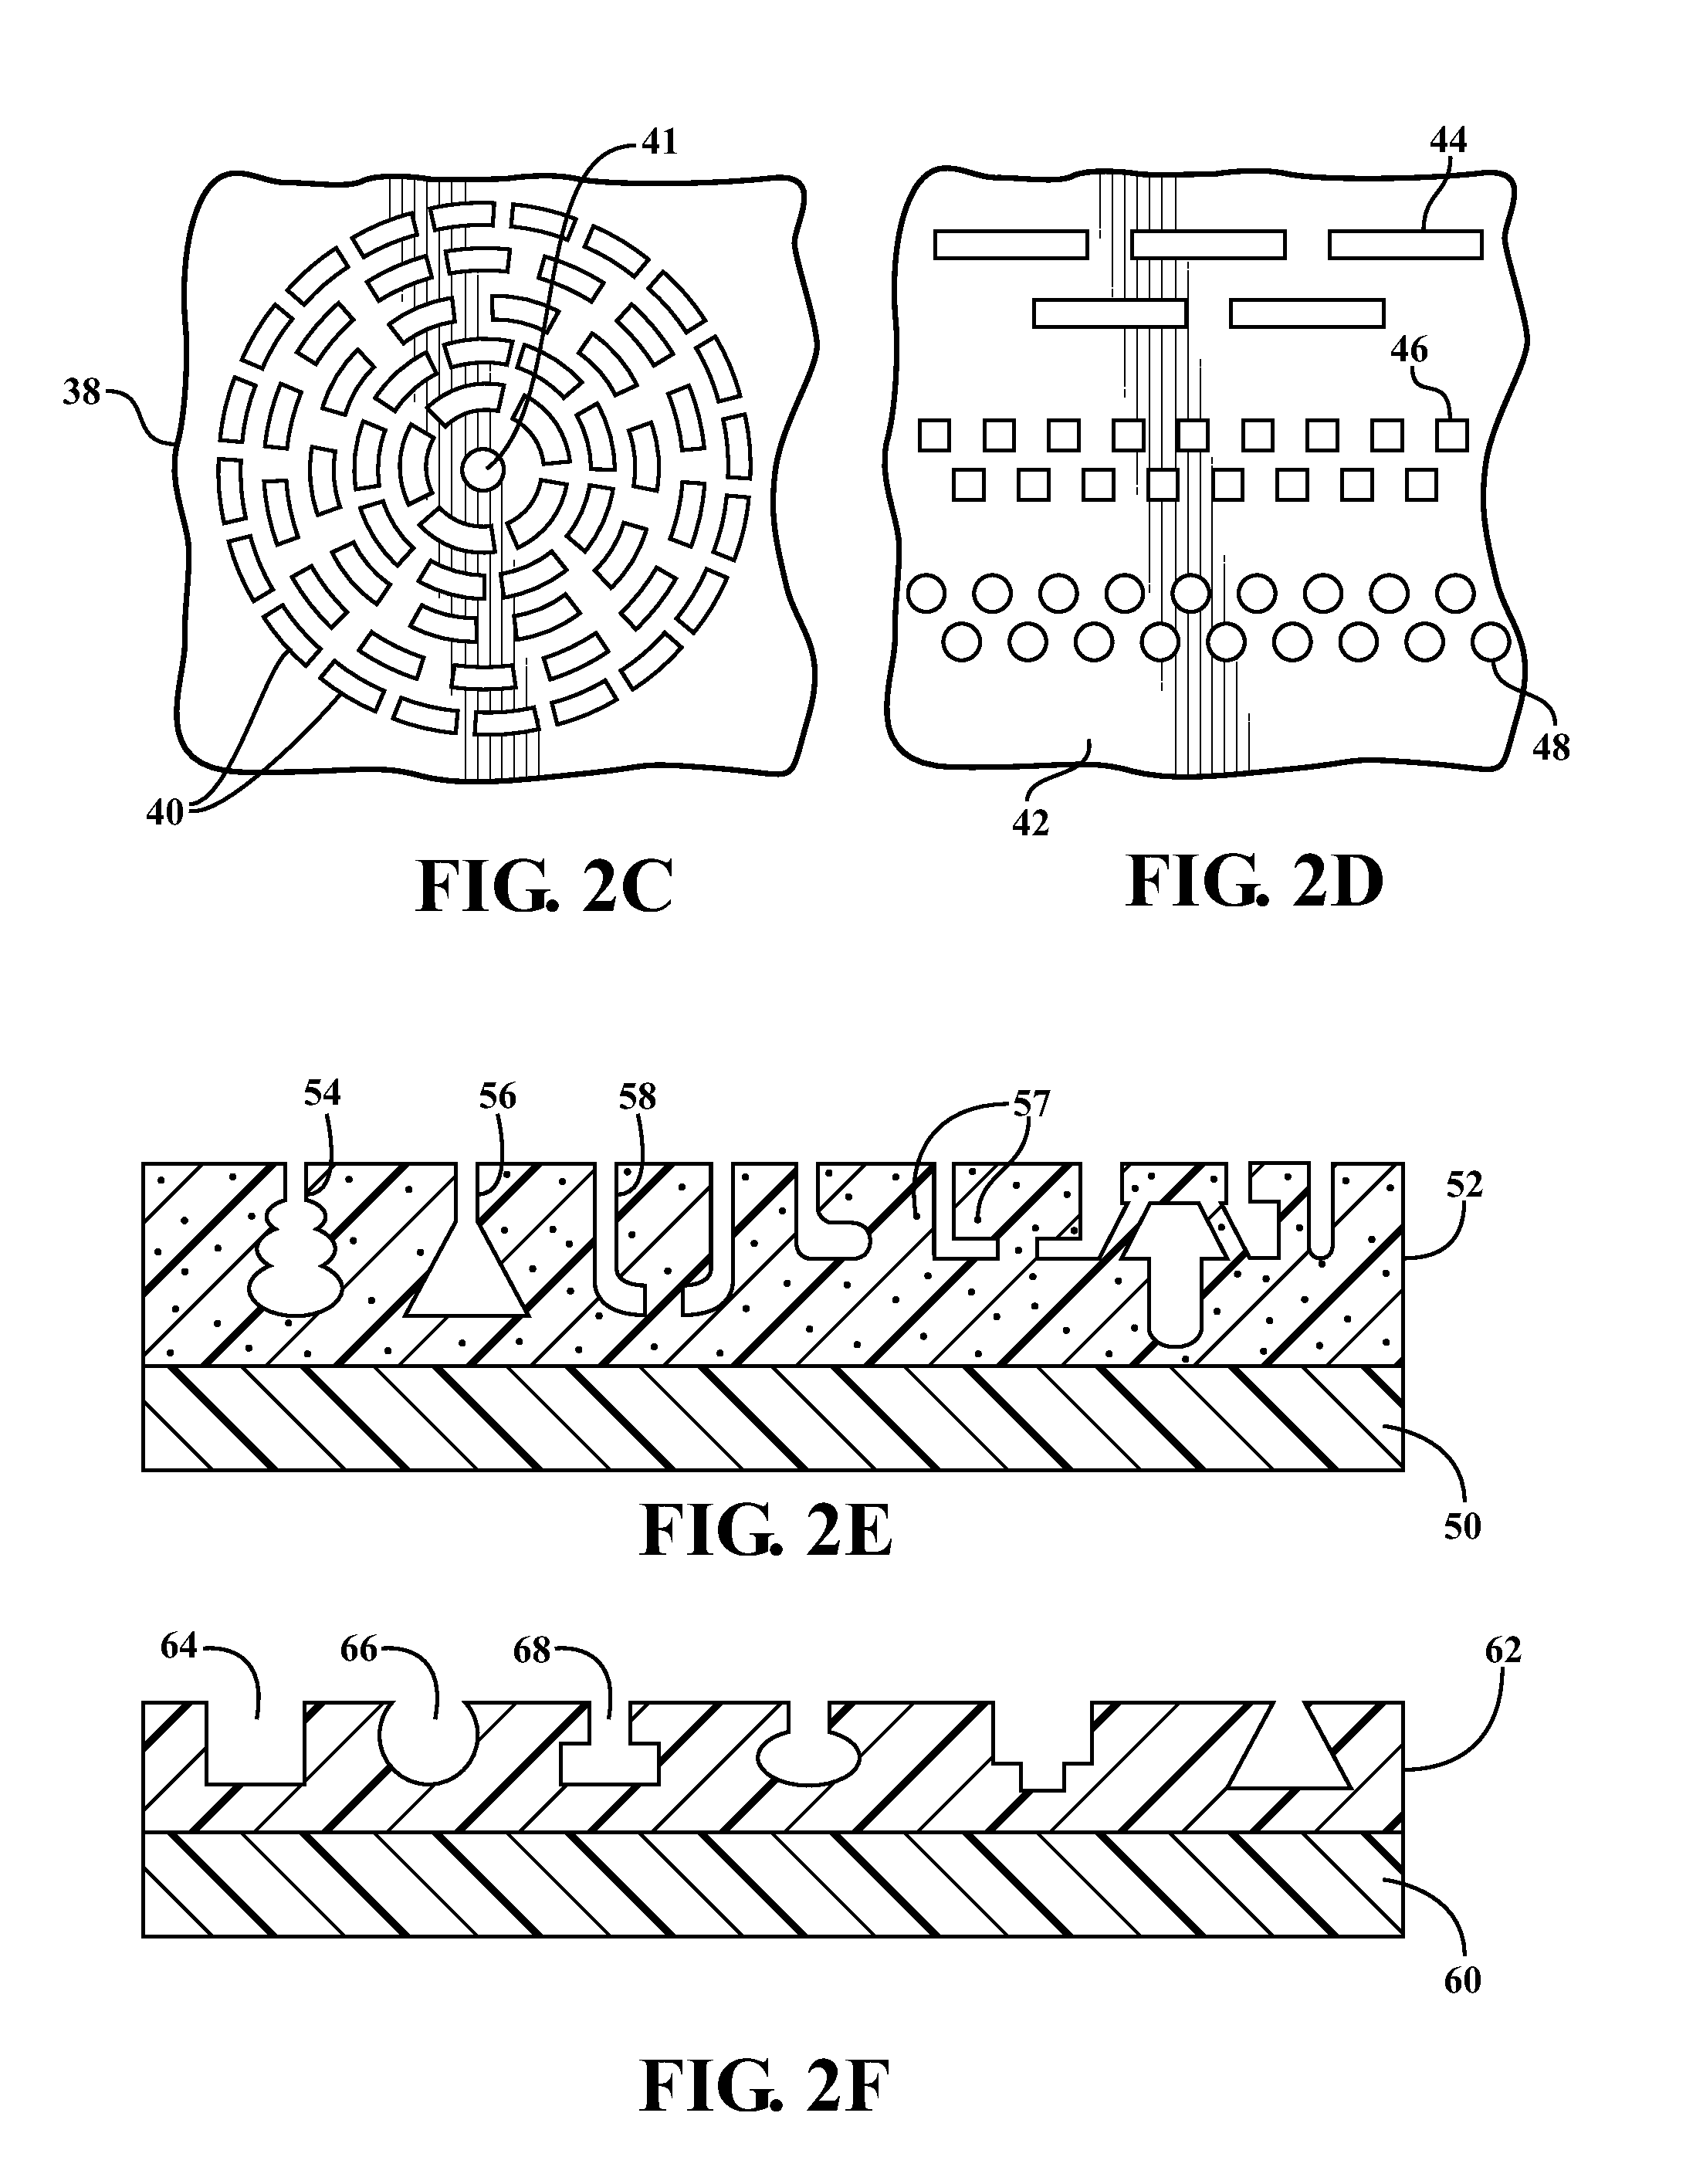 Joint assembly incorporating undercut surface design to entrap accumulating wear debris from plastic joint assembly